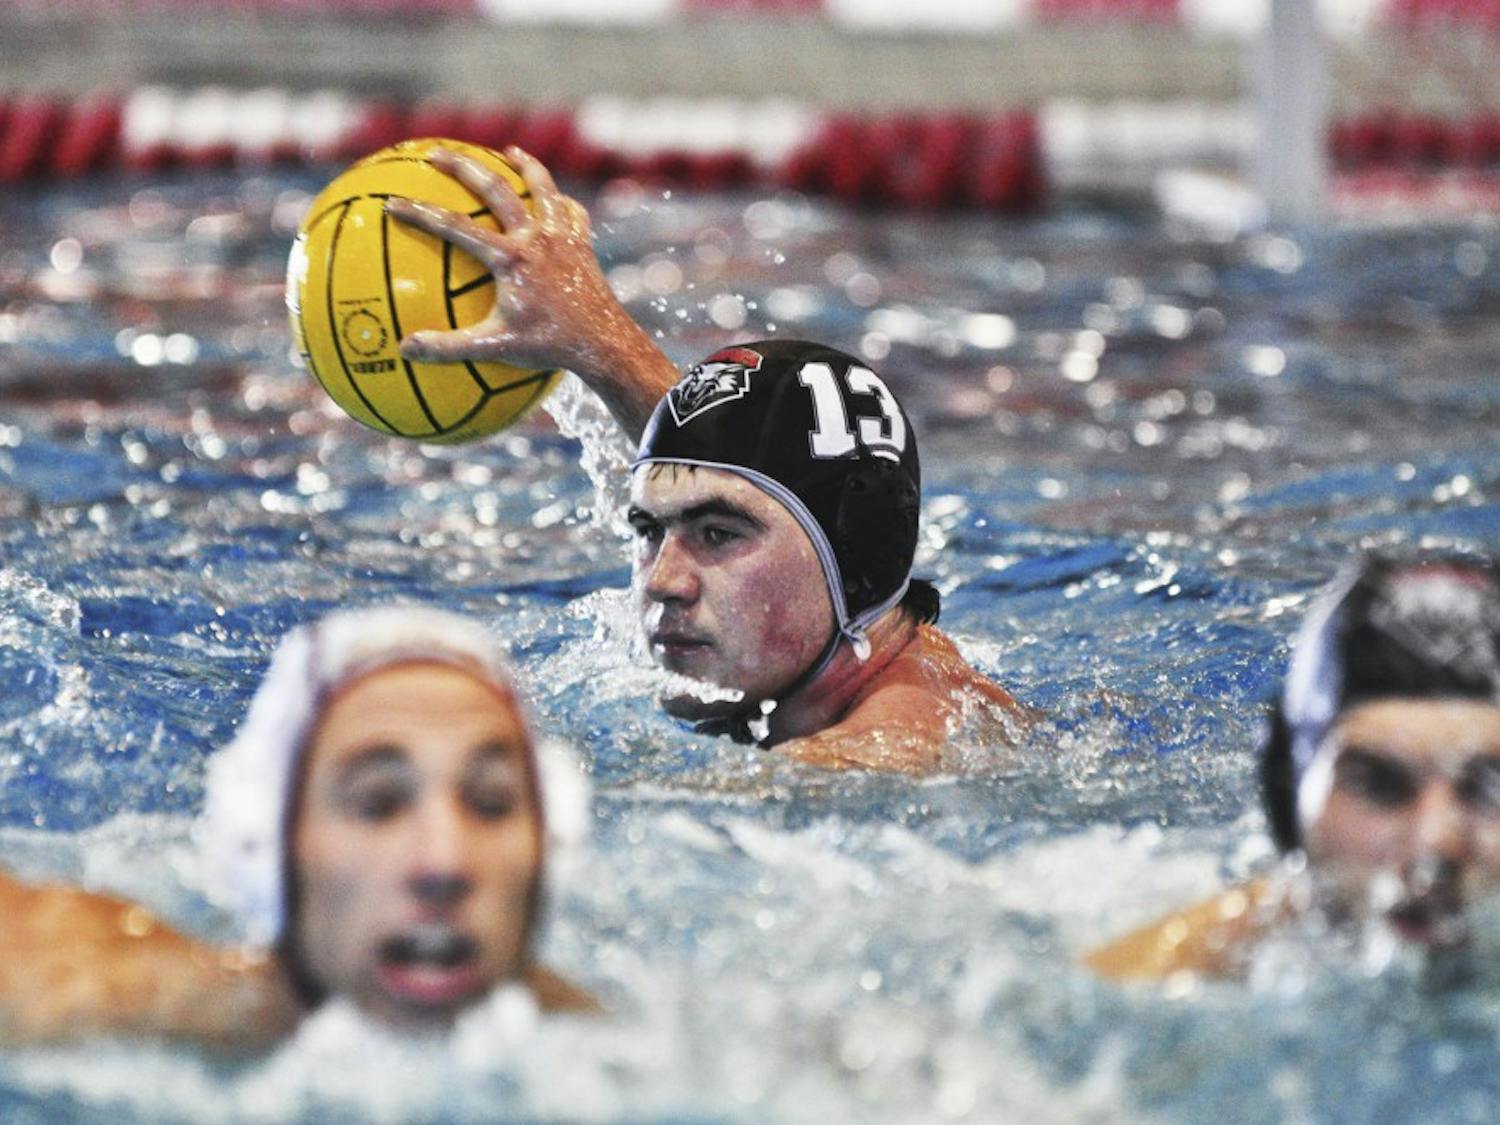 Matt Simmons gets ready to pass the ball at Johnson pool against Arizona State.